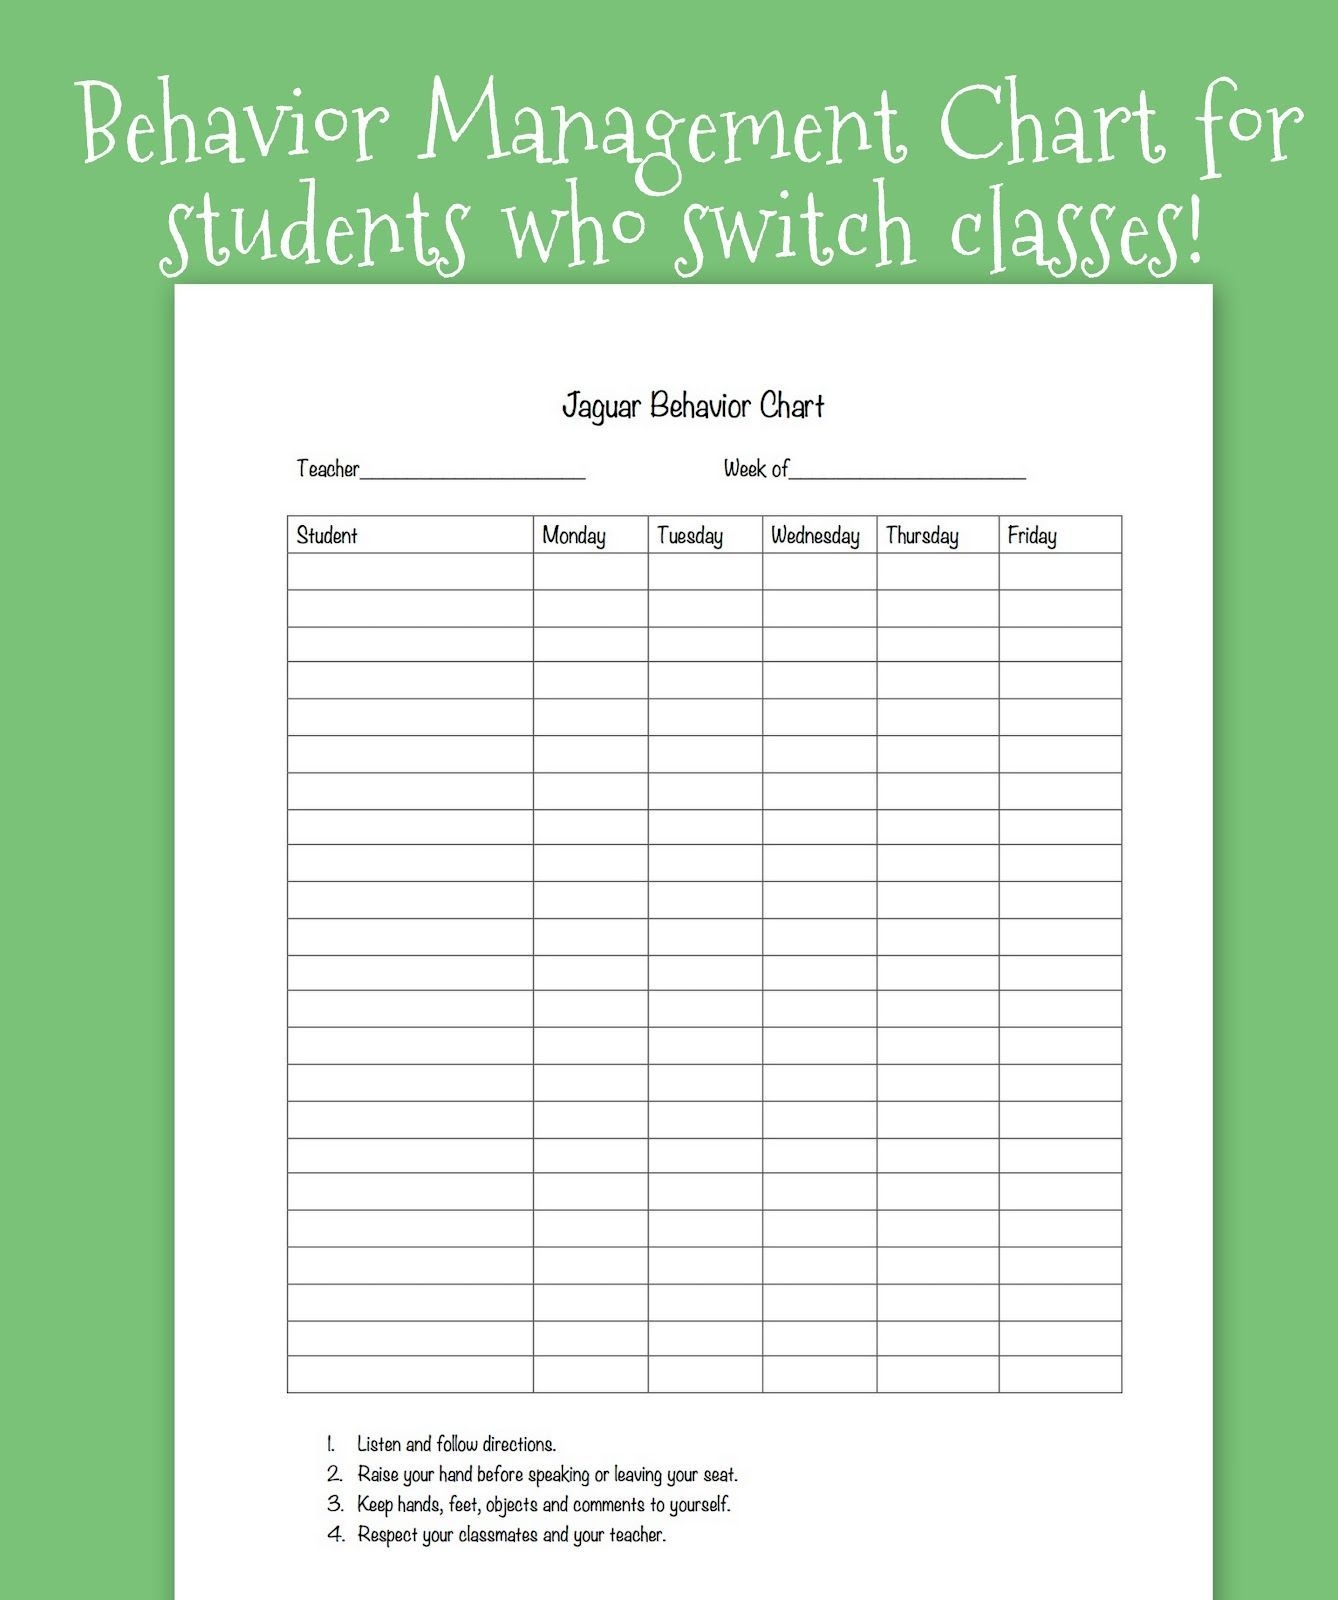 This Is A Great Template To Be Usedteachers To Adapt And